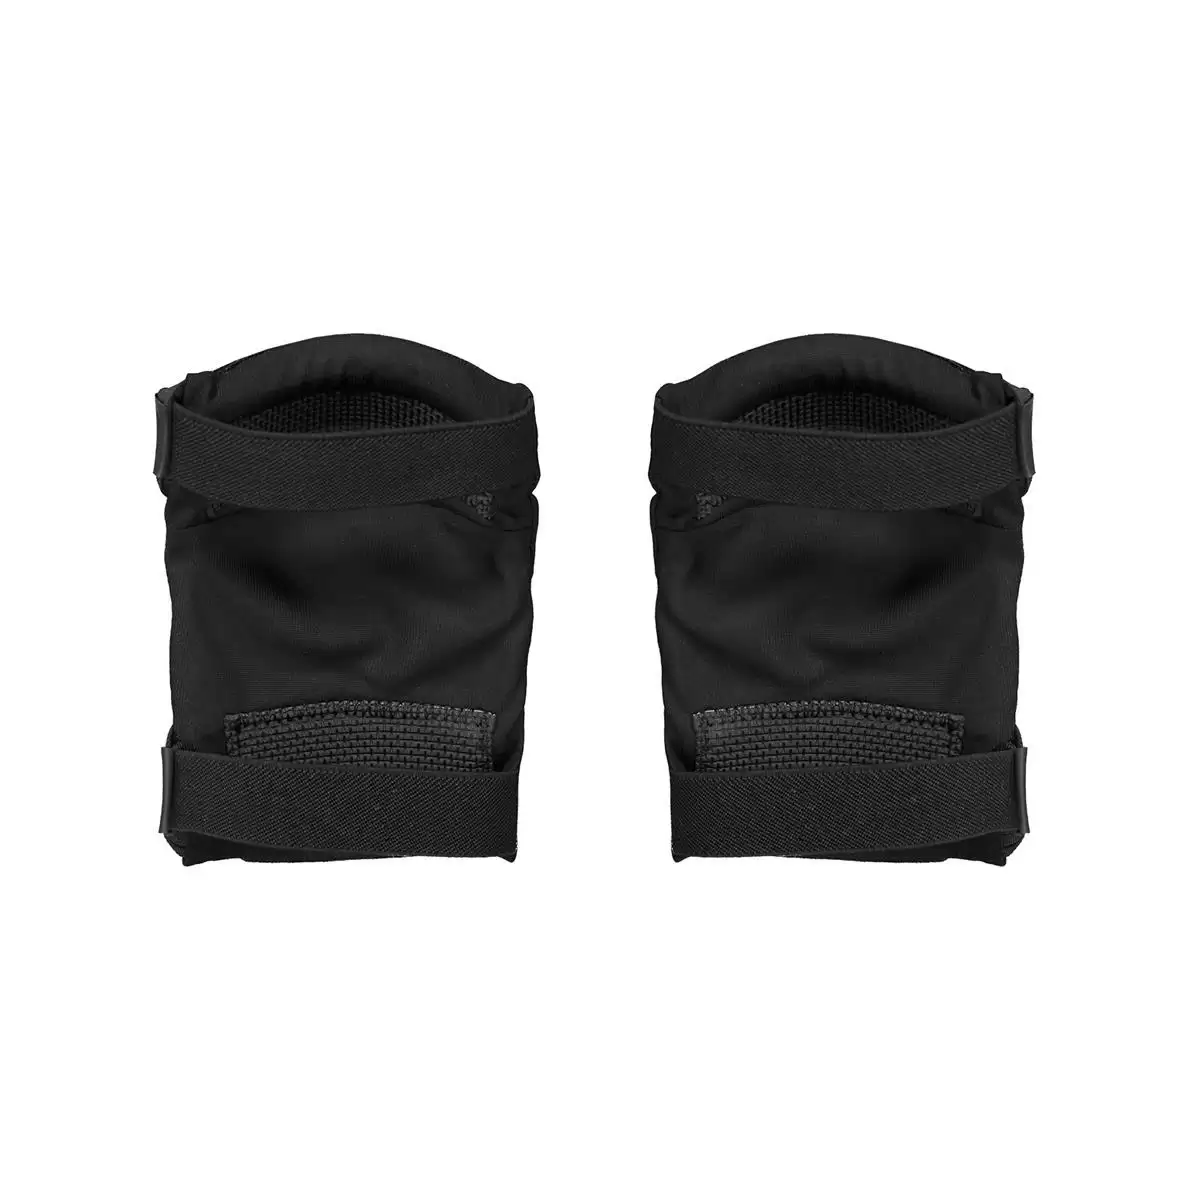 Kid knee / Elbow pads POCito Joint VPD Air Protector Black Size M #2